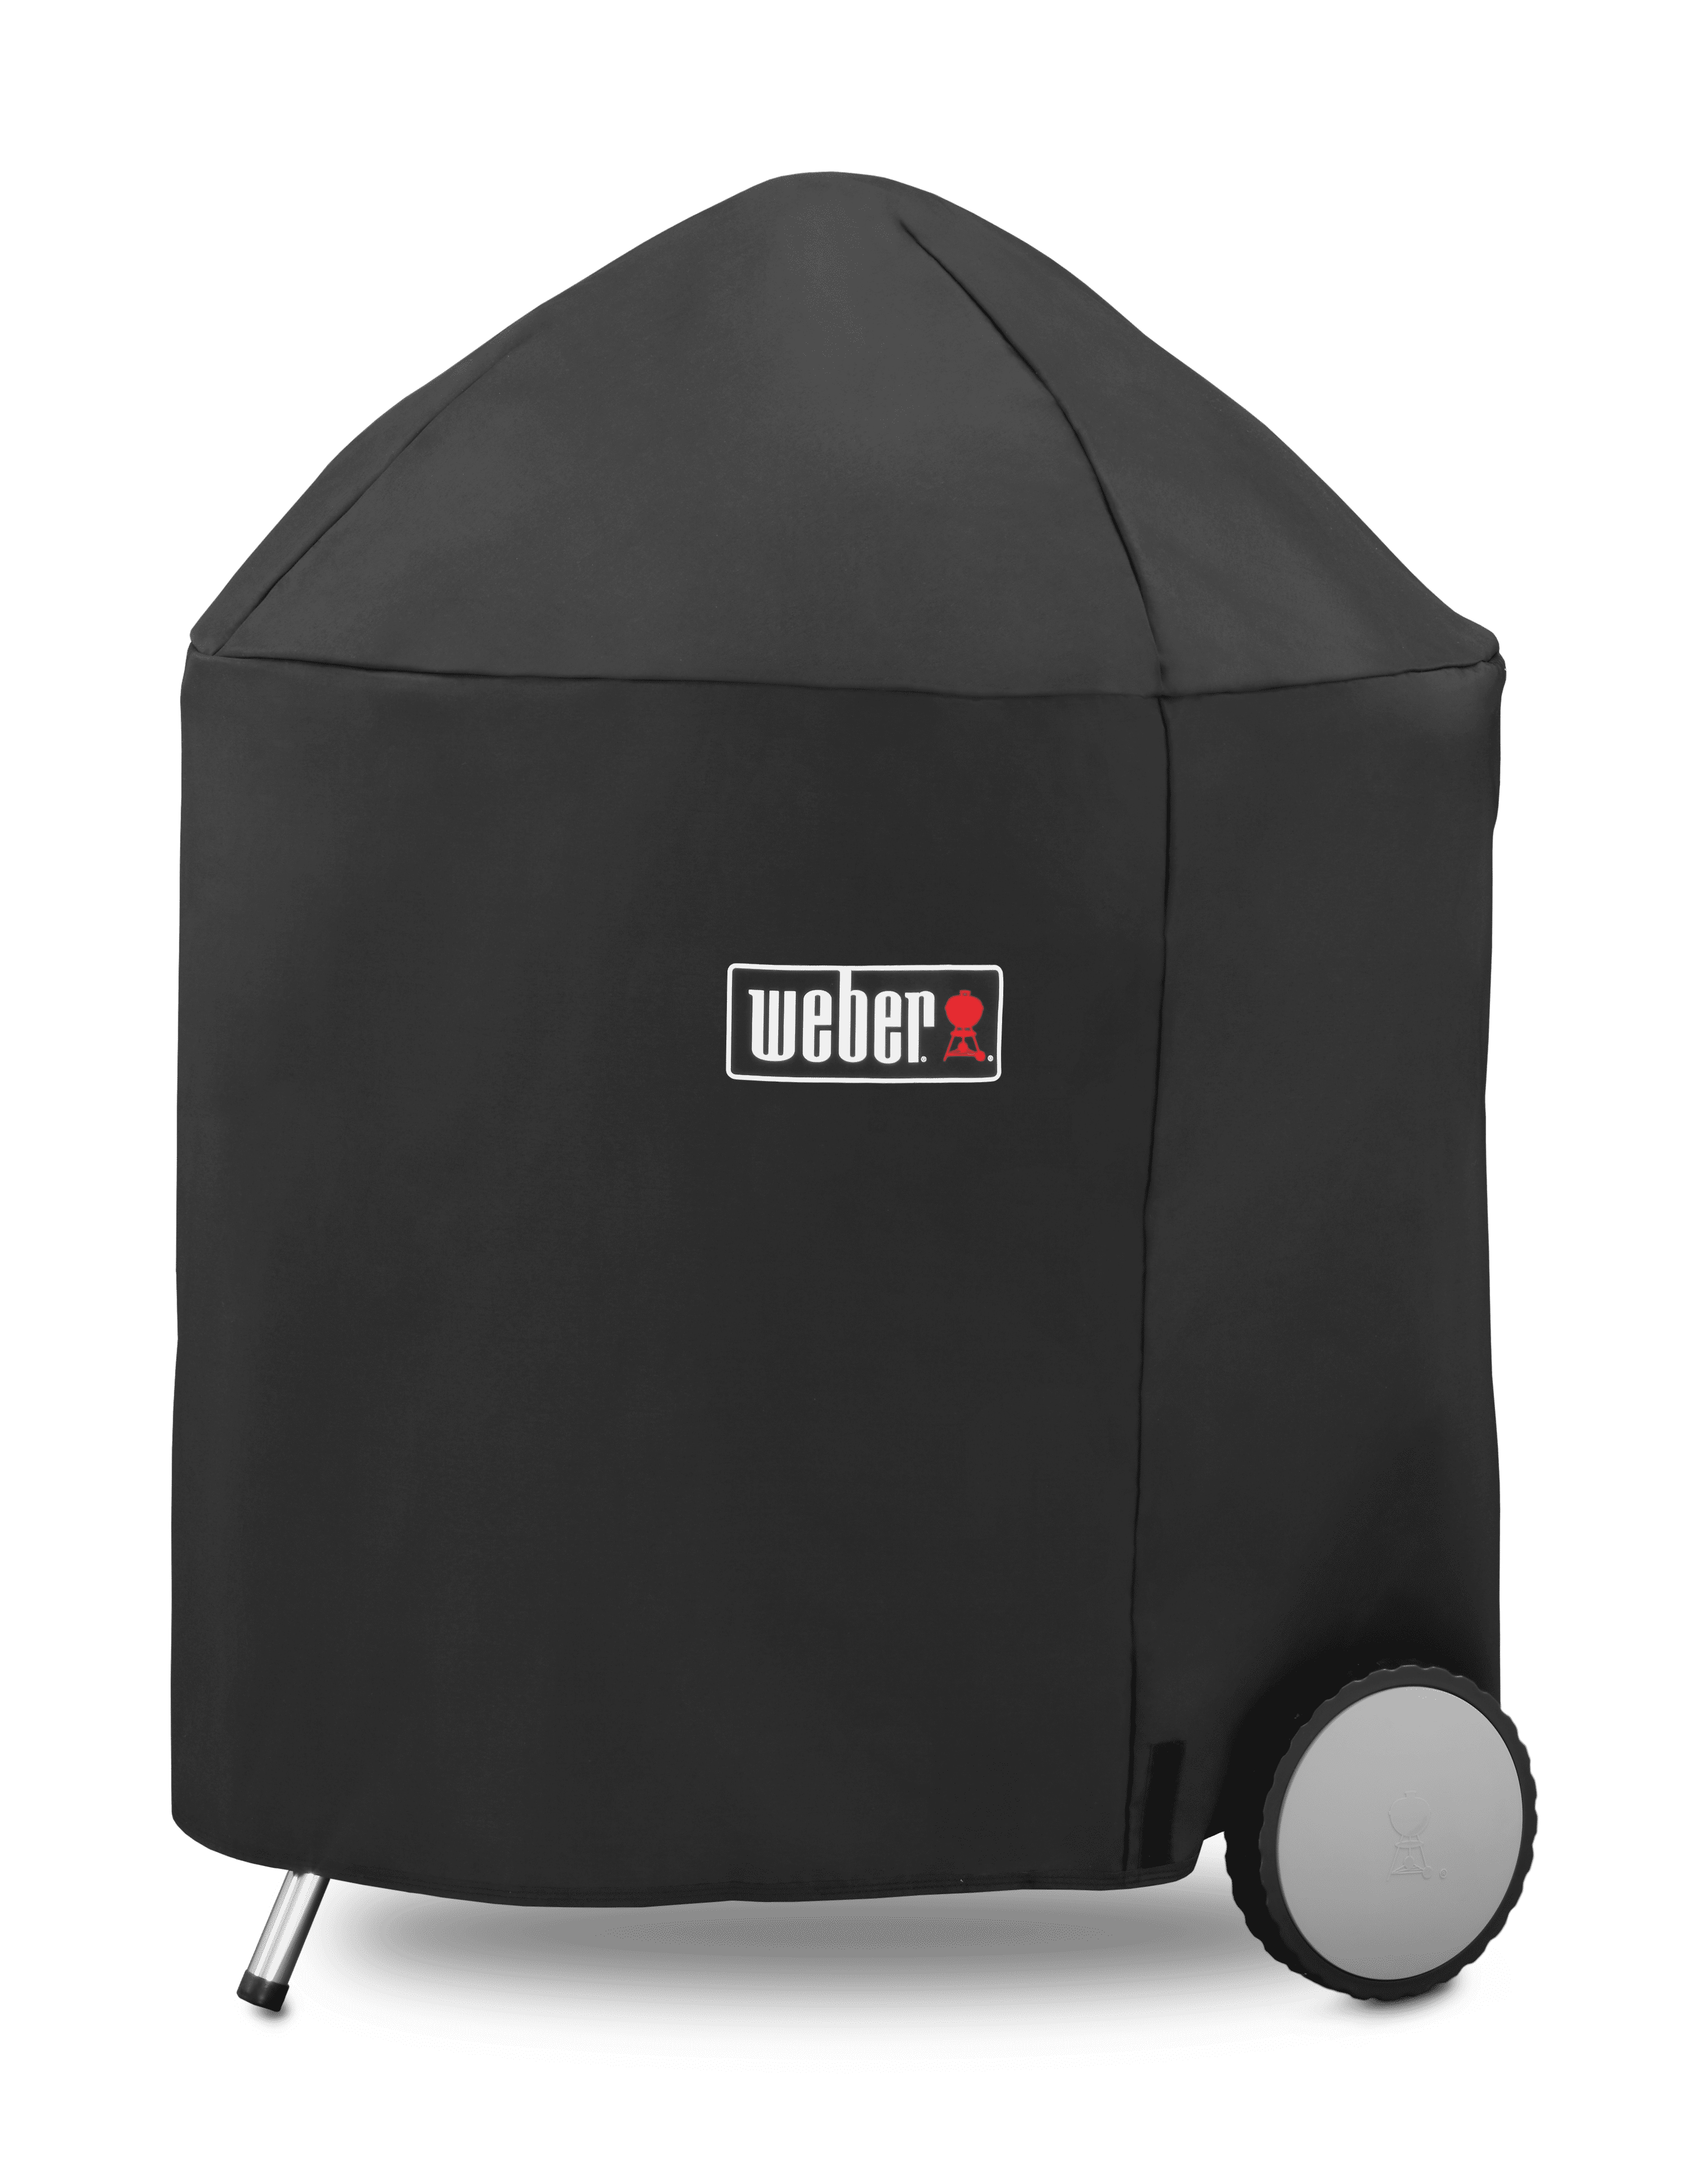 Waterproof 7176 Grill Cover For Weber 22 Inch Charcoal BBQ Grills UV Resistant 